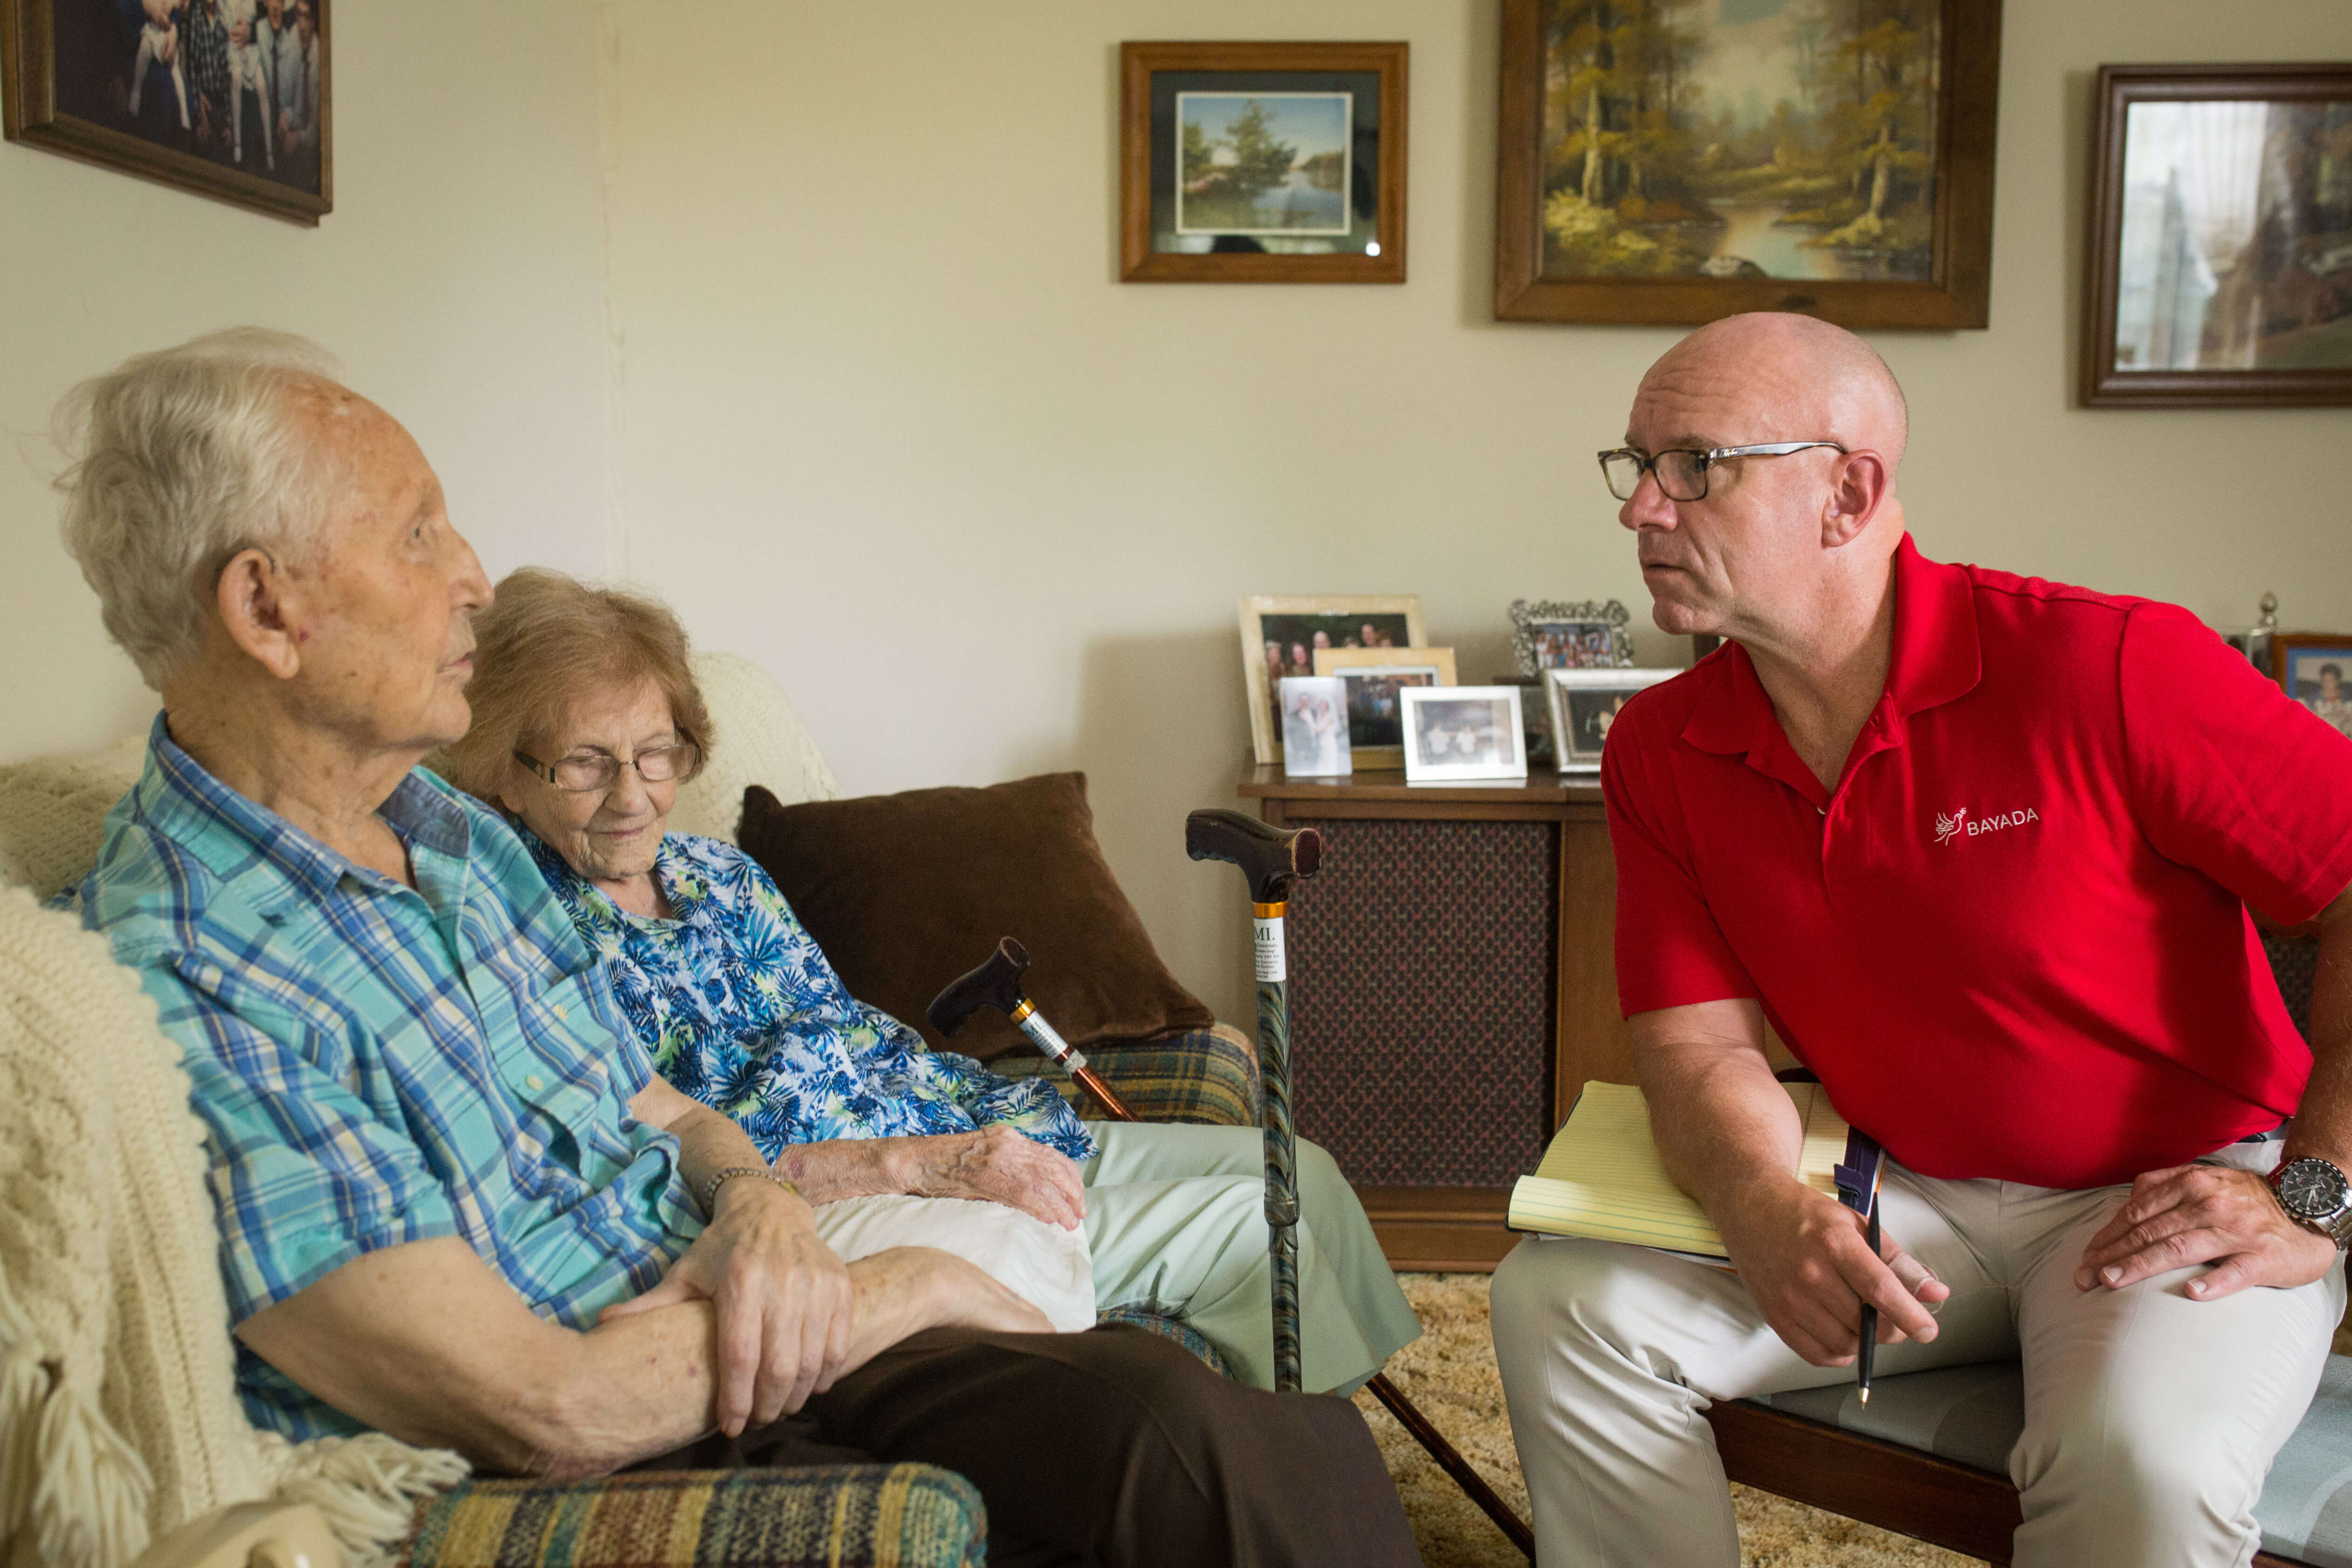 Stephen, a hospice social worker, speaks to his hospice client in his living room.